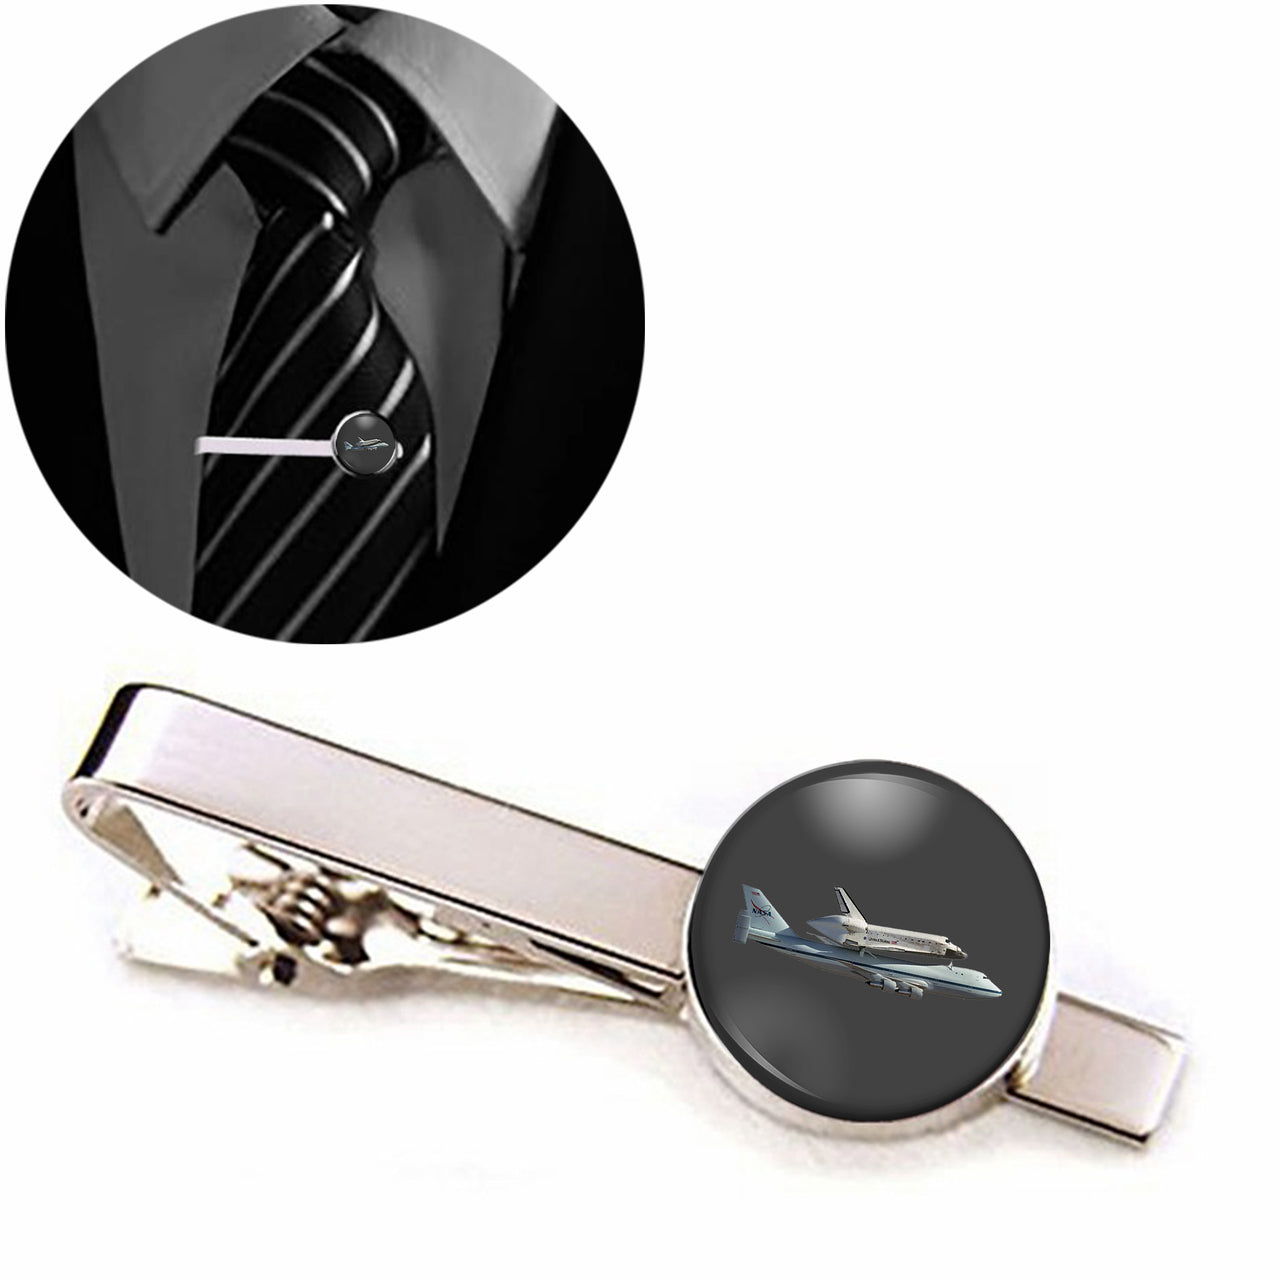 Space shuttle on 747 Designed Tie Clips